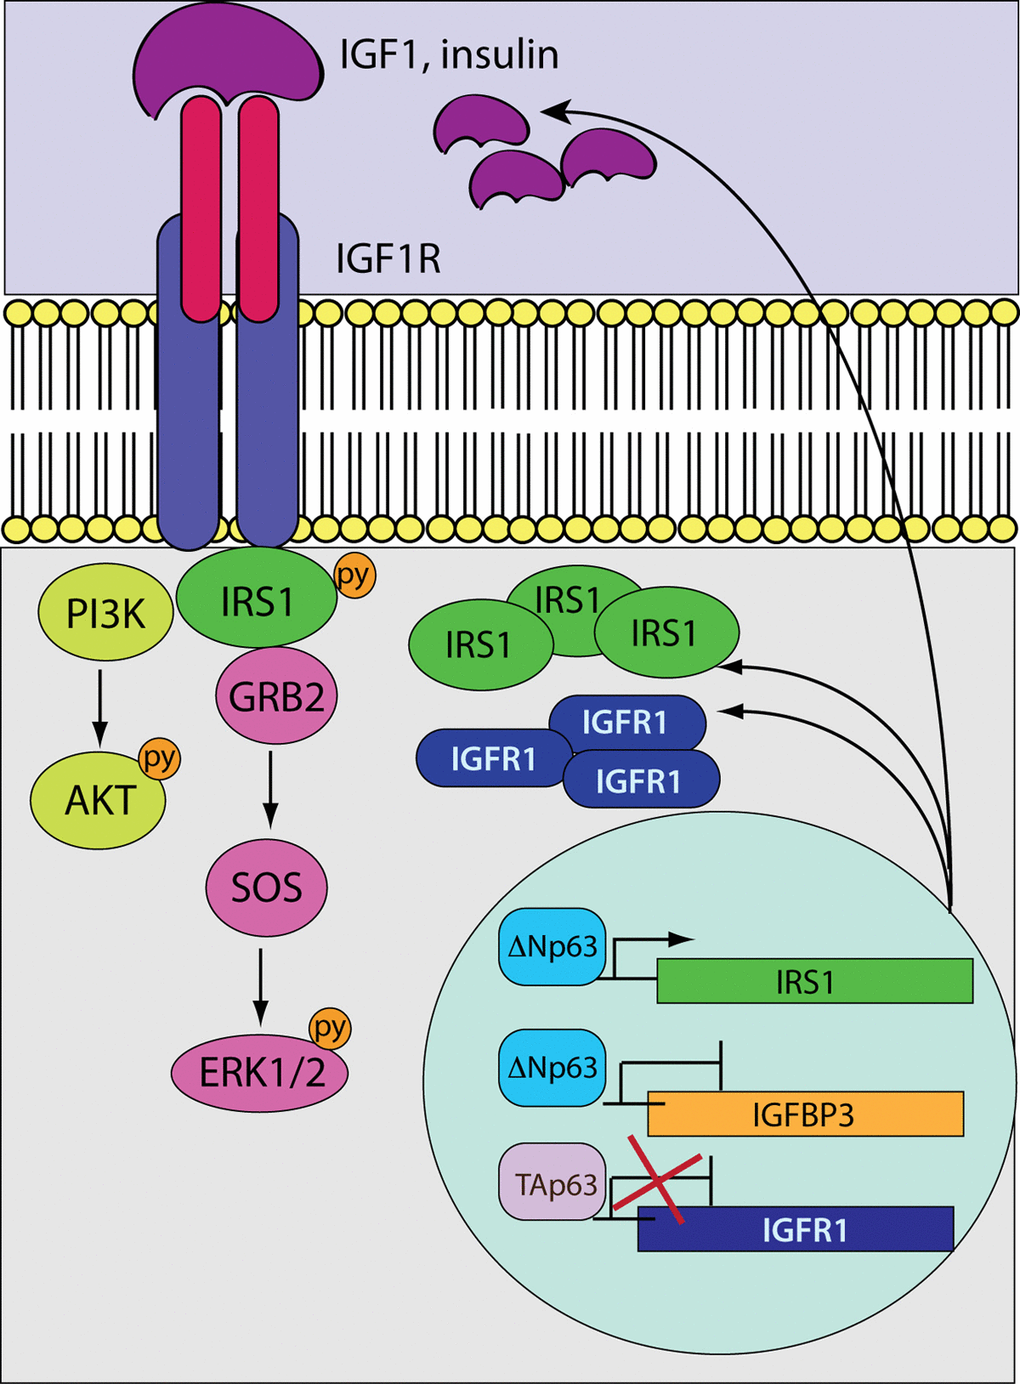 A model depicting the crosstalk between p63 and the IGF system. While the tumour suppressive TAp63 isoforms negatively control Igf1r transcription, the oncogenic ΔNp63 variants induce and repress the expression of the Irs1 and Igfbp3 genes, respectively. In HNSCC cells overexpressing ΔNp63, the transcription of Igf1r would be stimulated as a result of the unbalanced ratio between the TA/ΔN p63 proteins. Aberrant accumulation of IGF1R and its docking protein IRS1 would enhance signalling activation in response to receptor stimulation. On the other hand, reduced expression levels of Igfbp3 would increase the availability of circulating IGF1 that could further potentiate receptor activation.